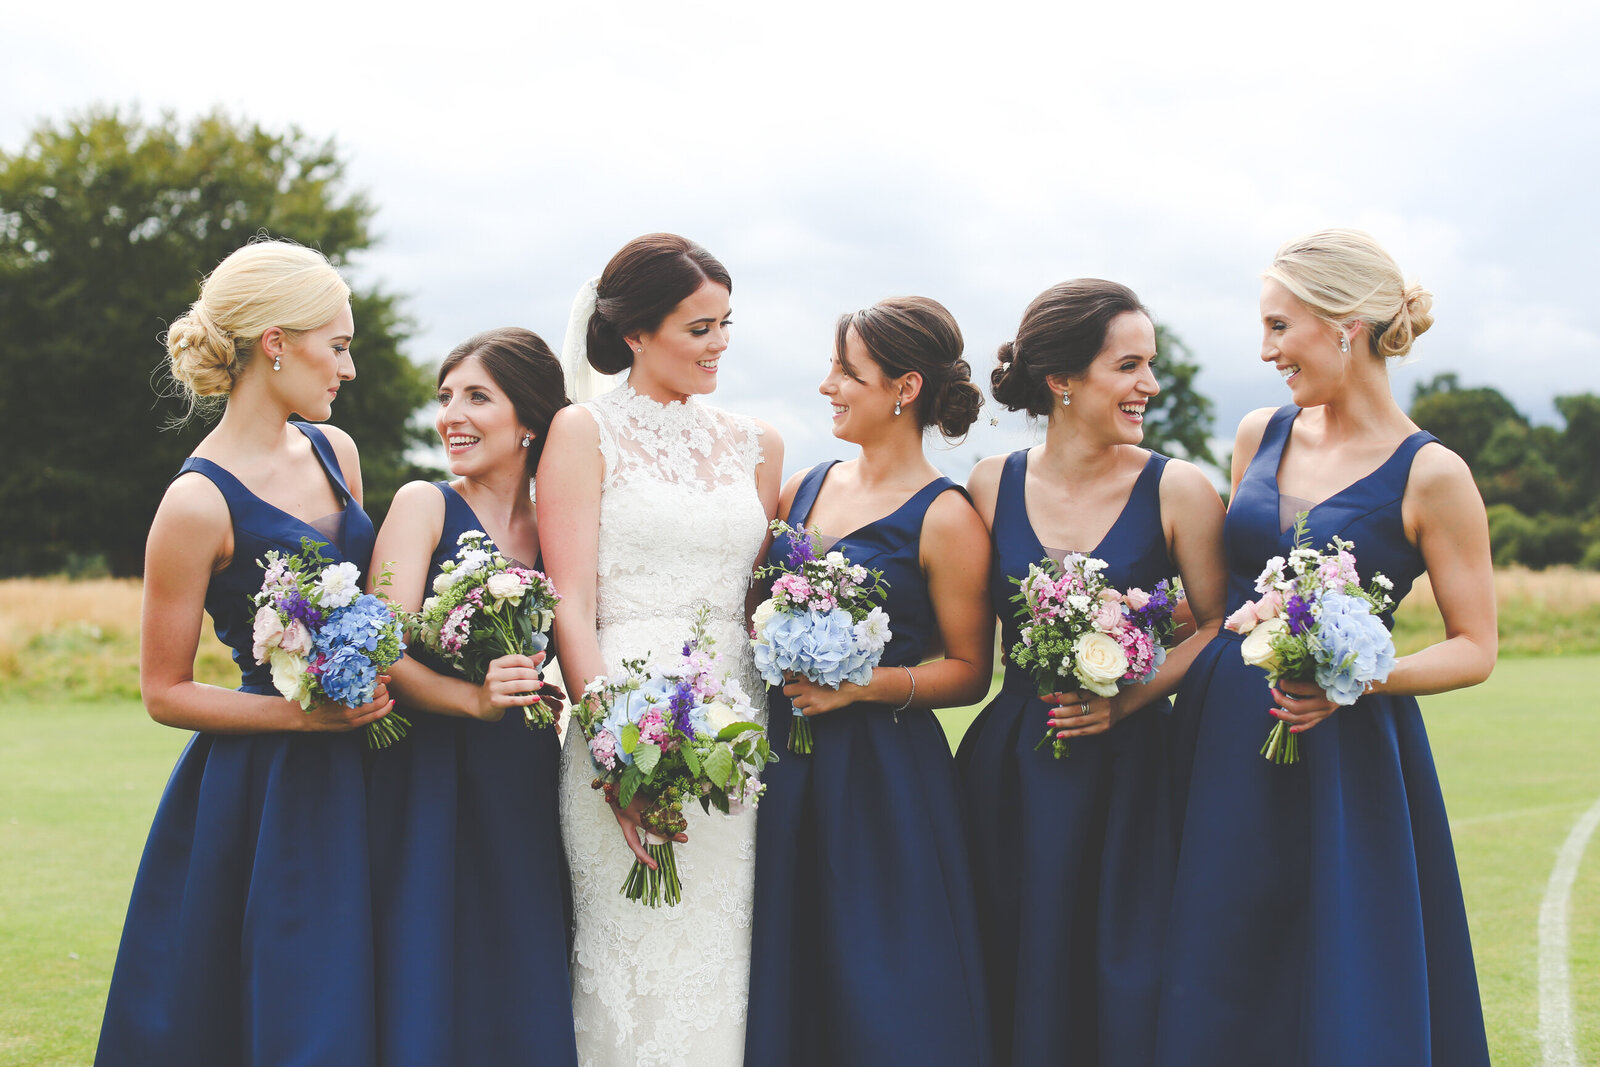 WP-BEAUTIFUL-BRIDESMAIDS-ALL-IN-BLUE_0035